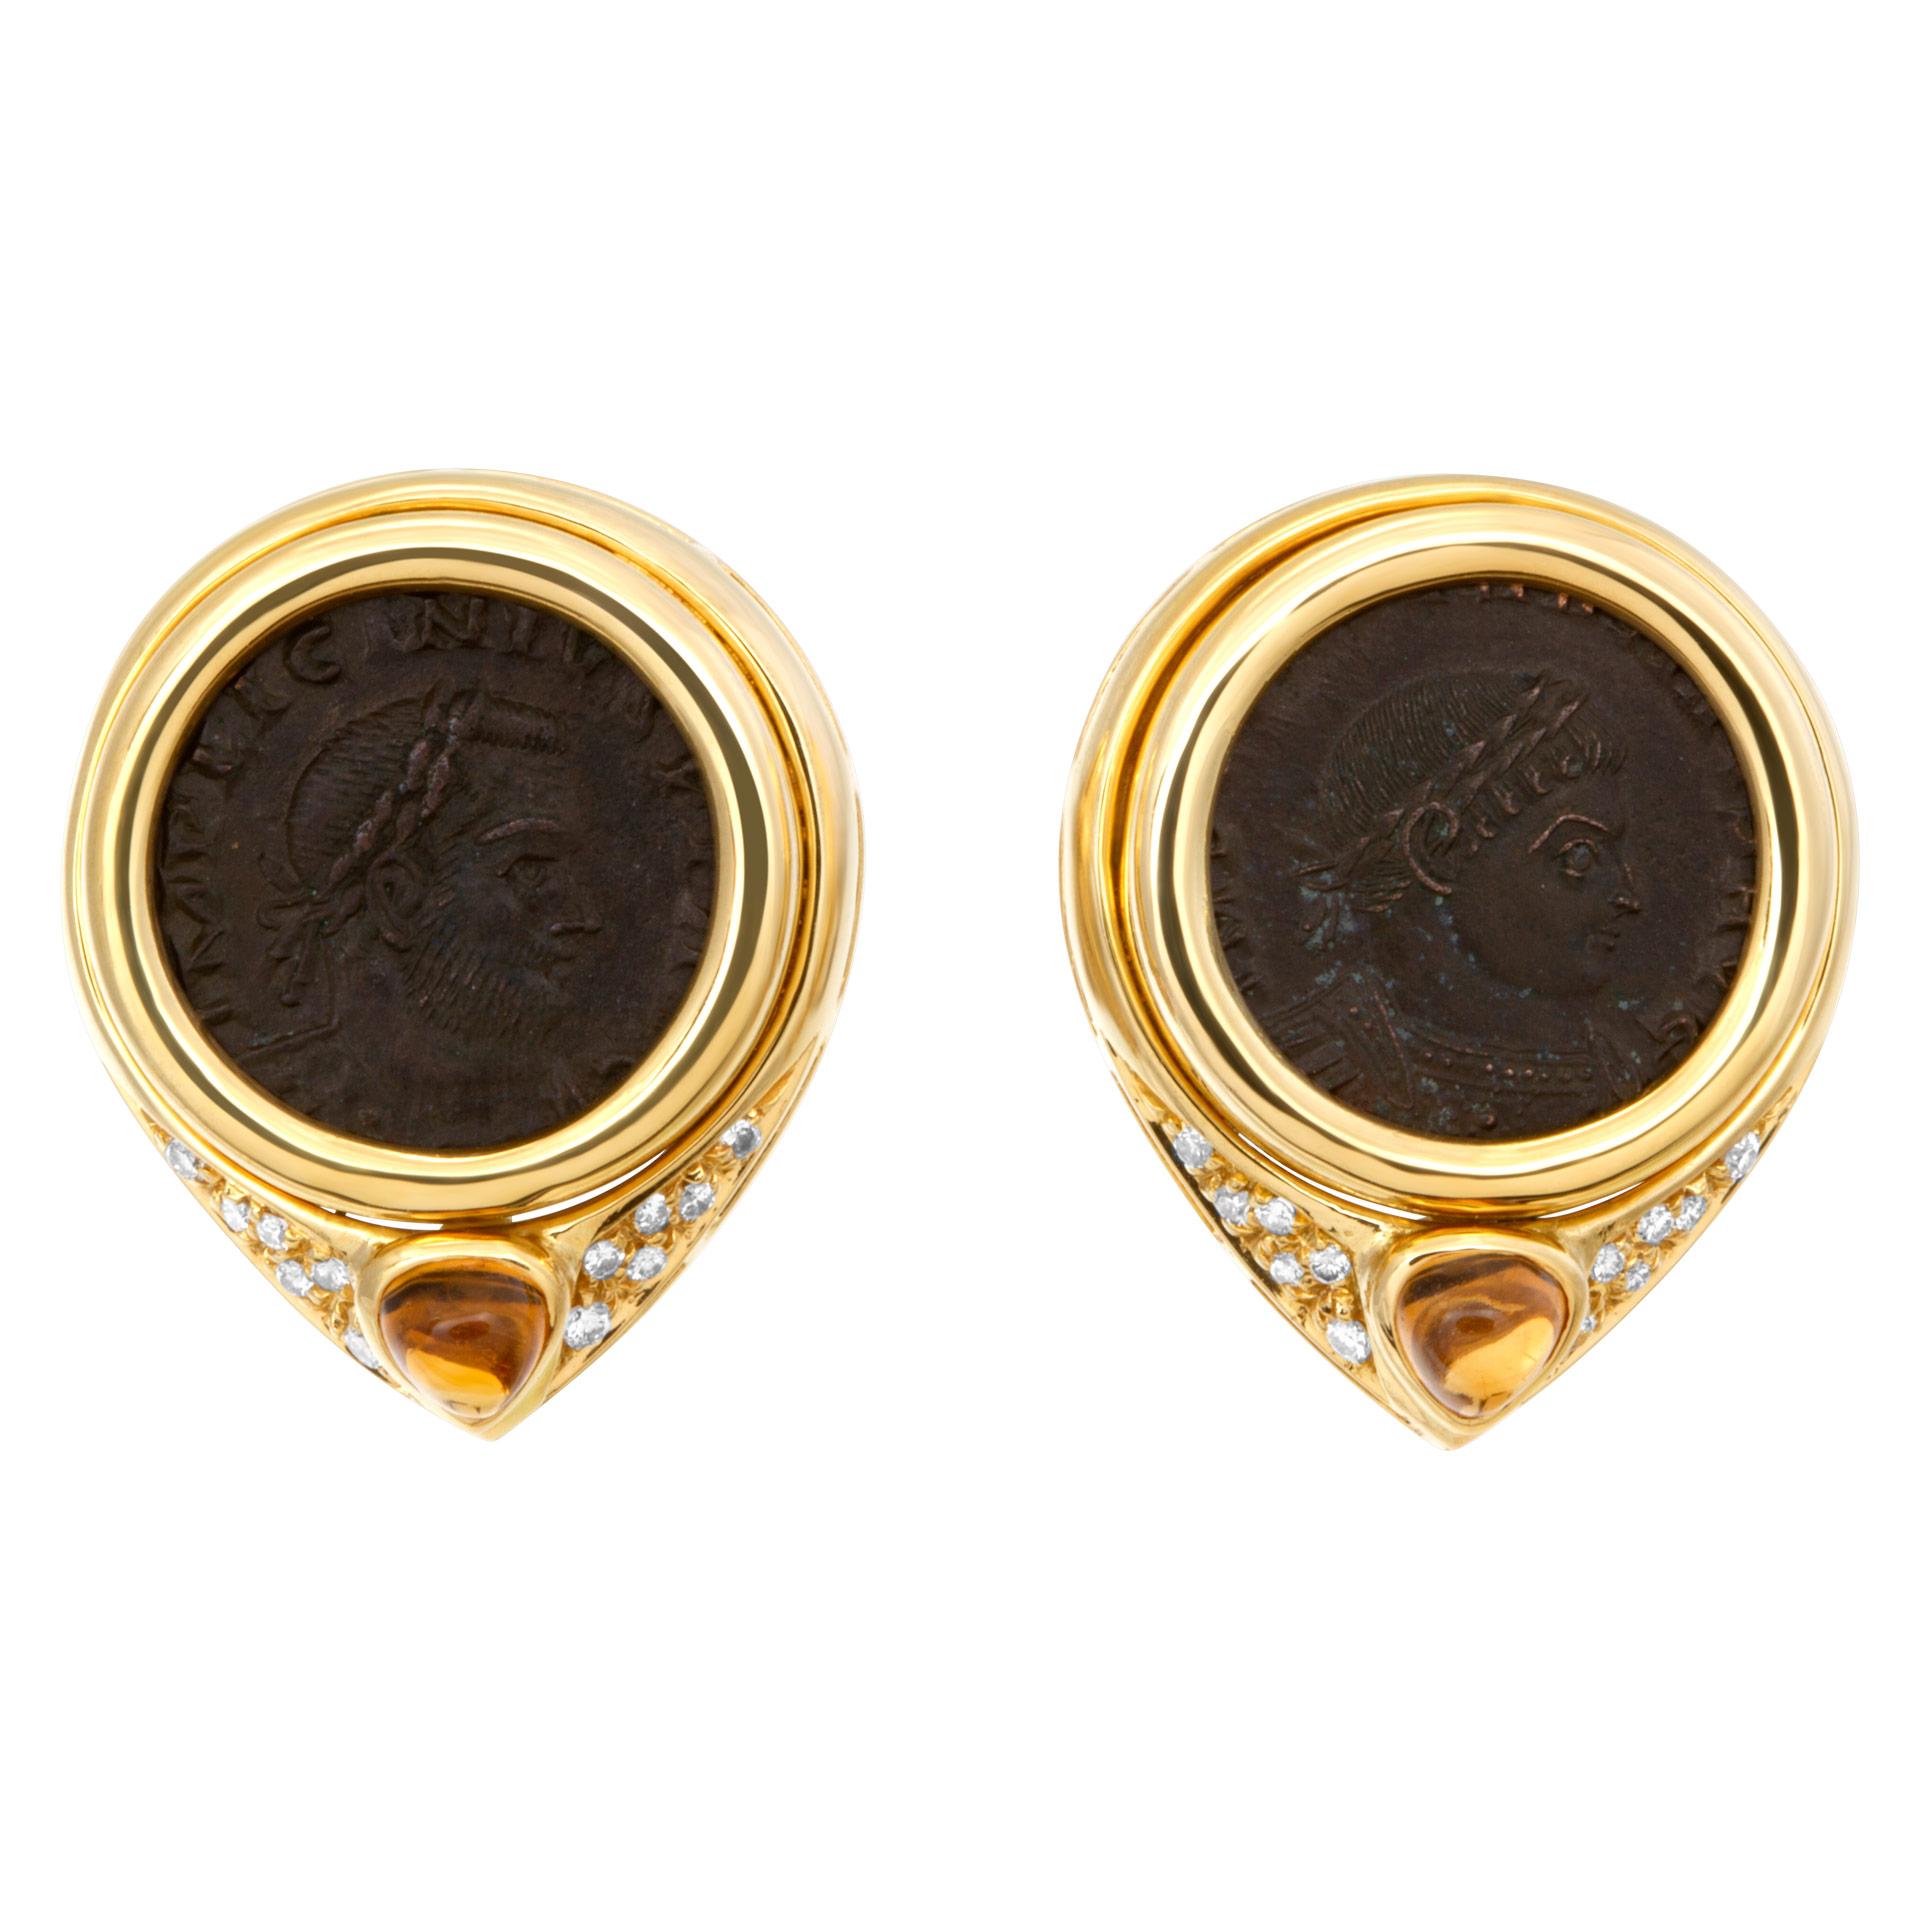 Ancient Coin Earrings in 18k